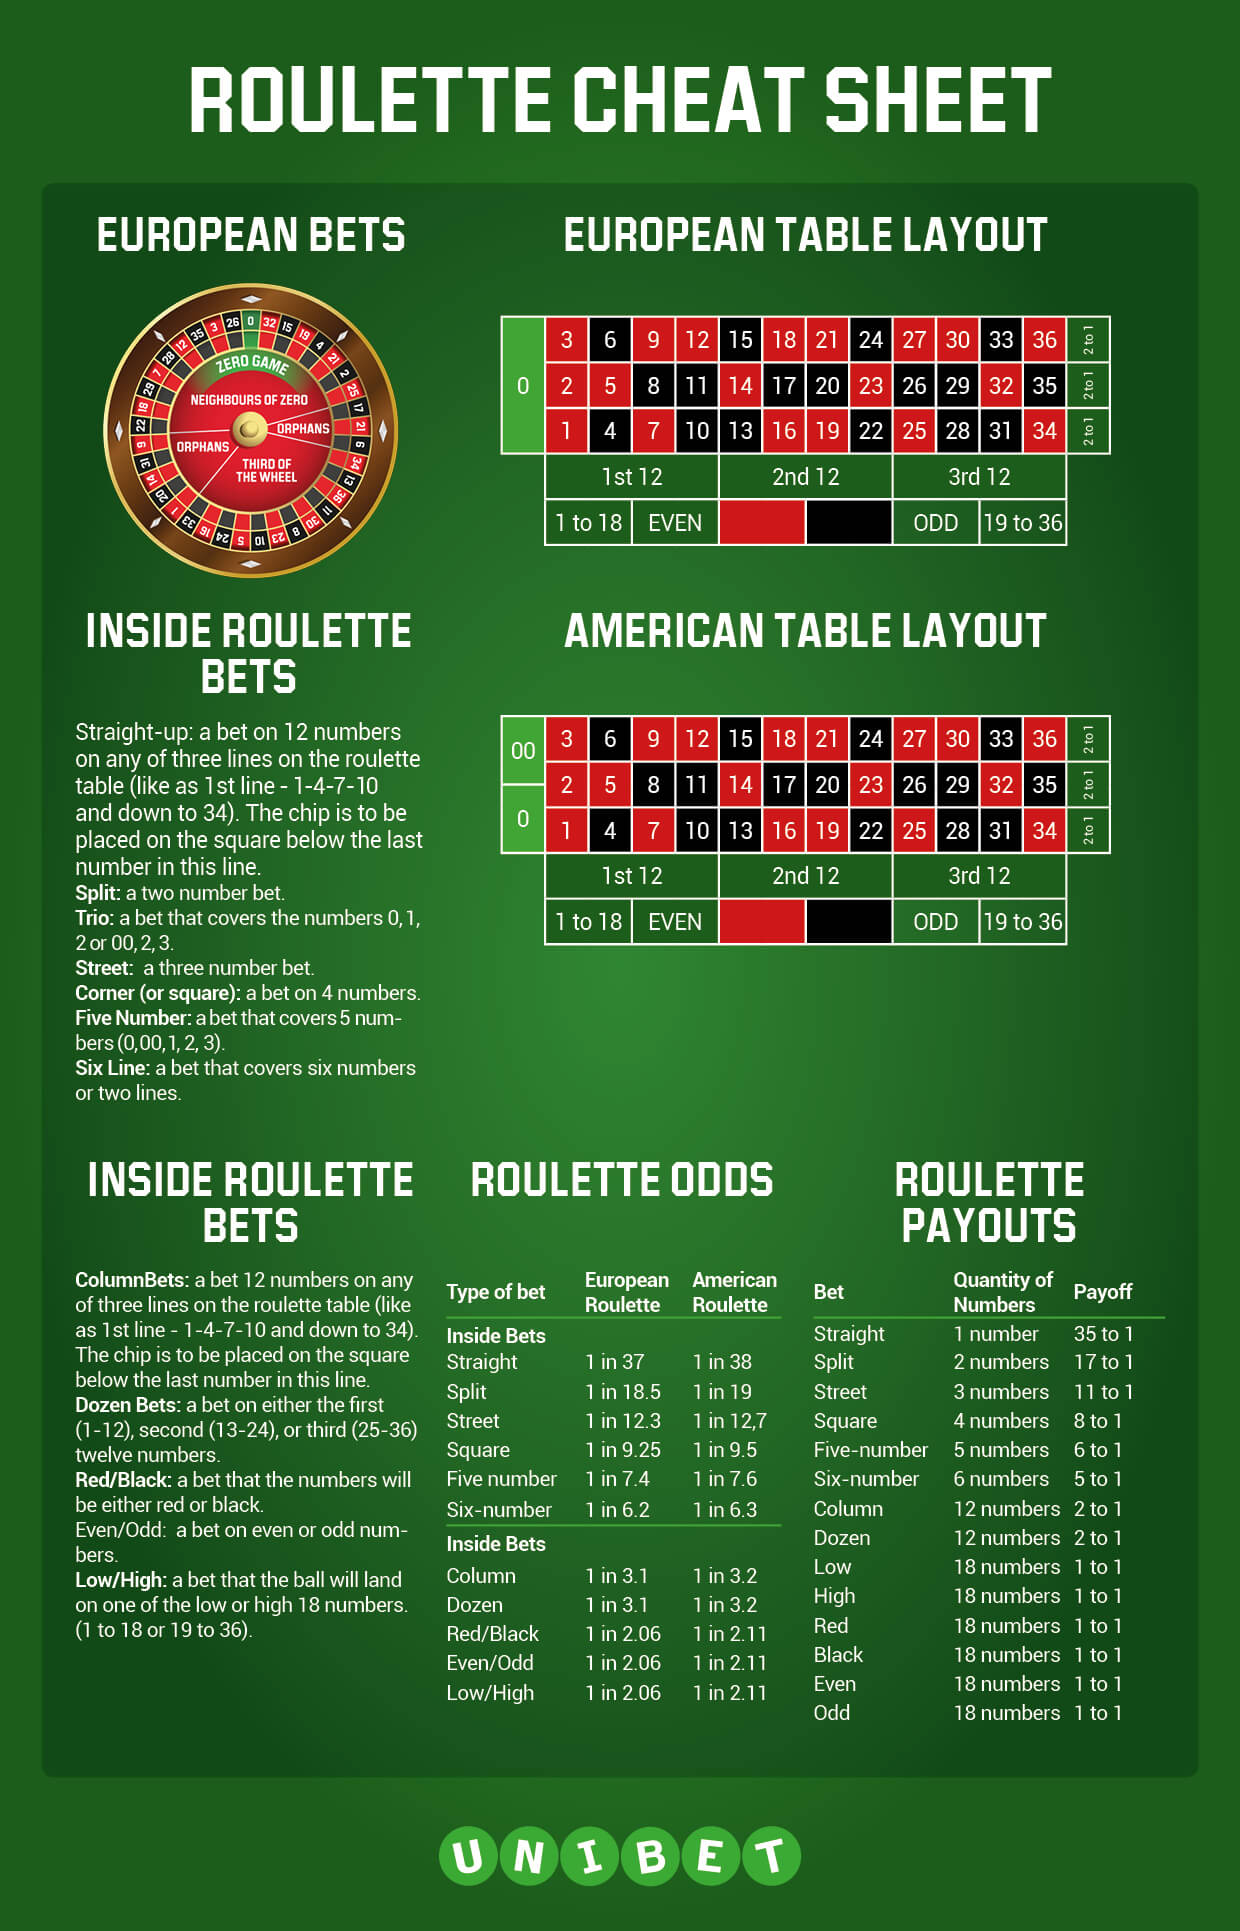 does roulette pay 1 to 36